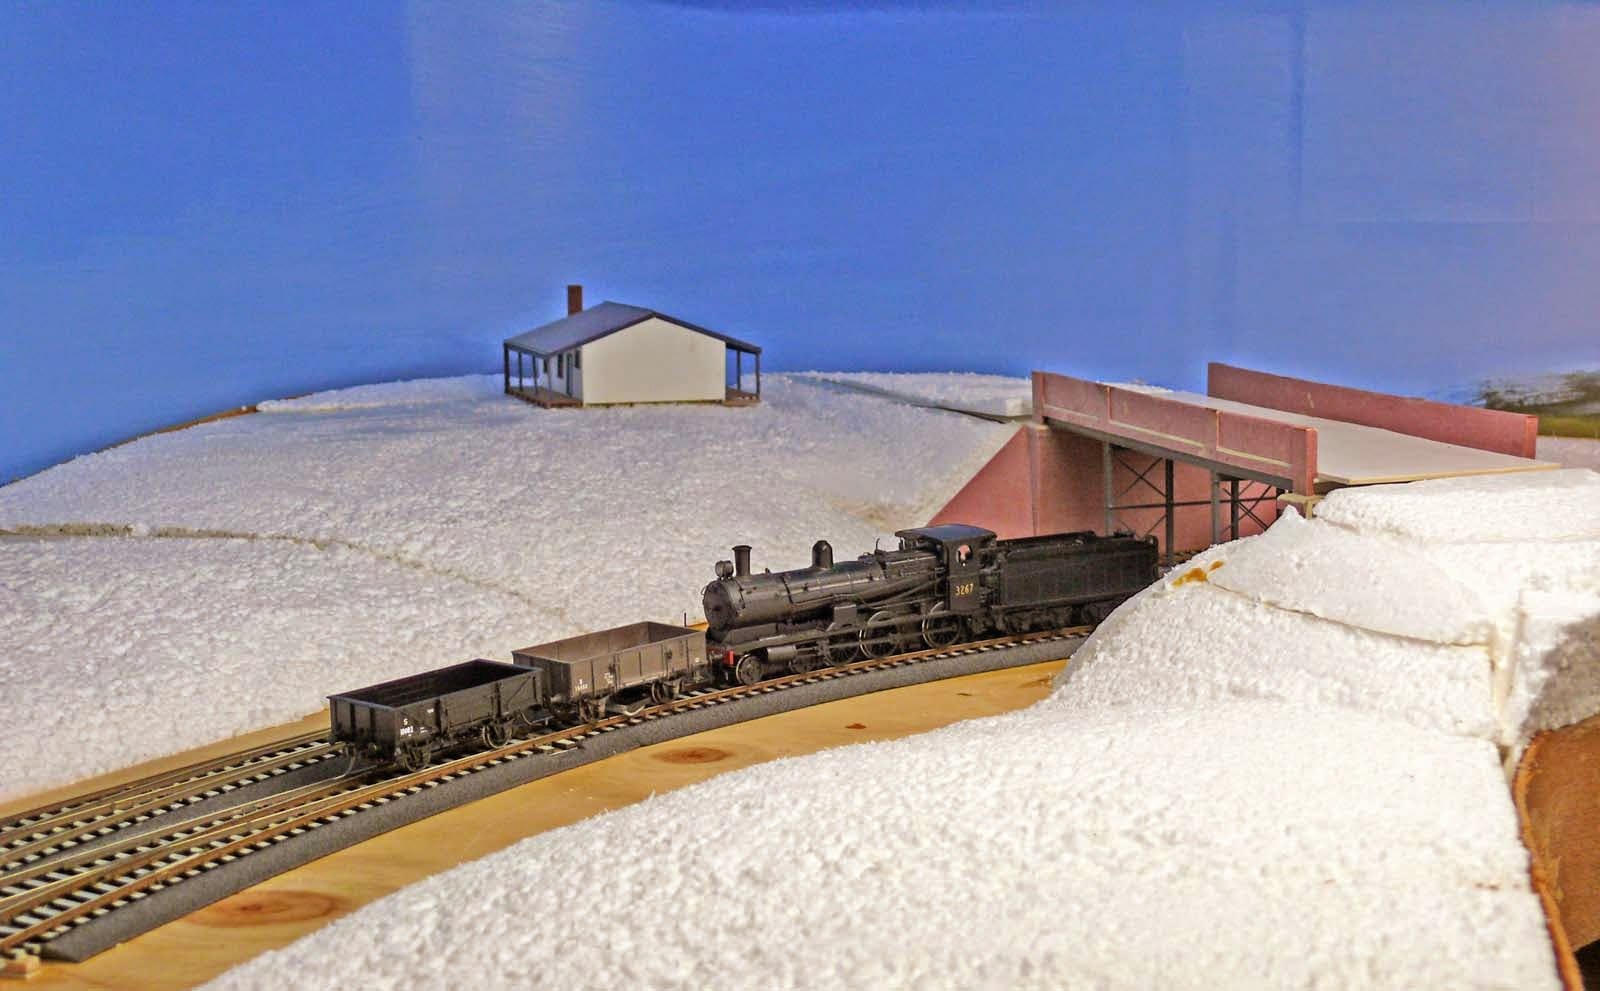 How to Painting Rocks and make Scenery Foundation for model train layouts